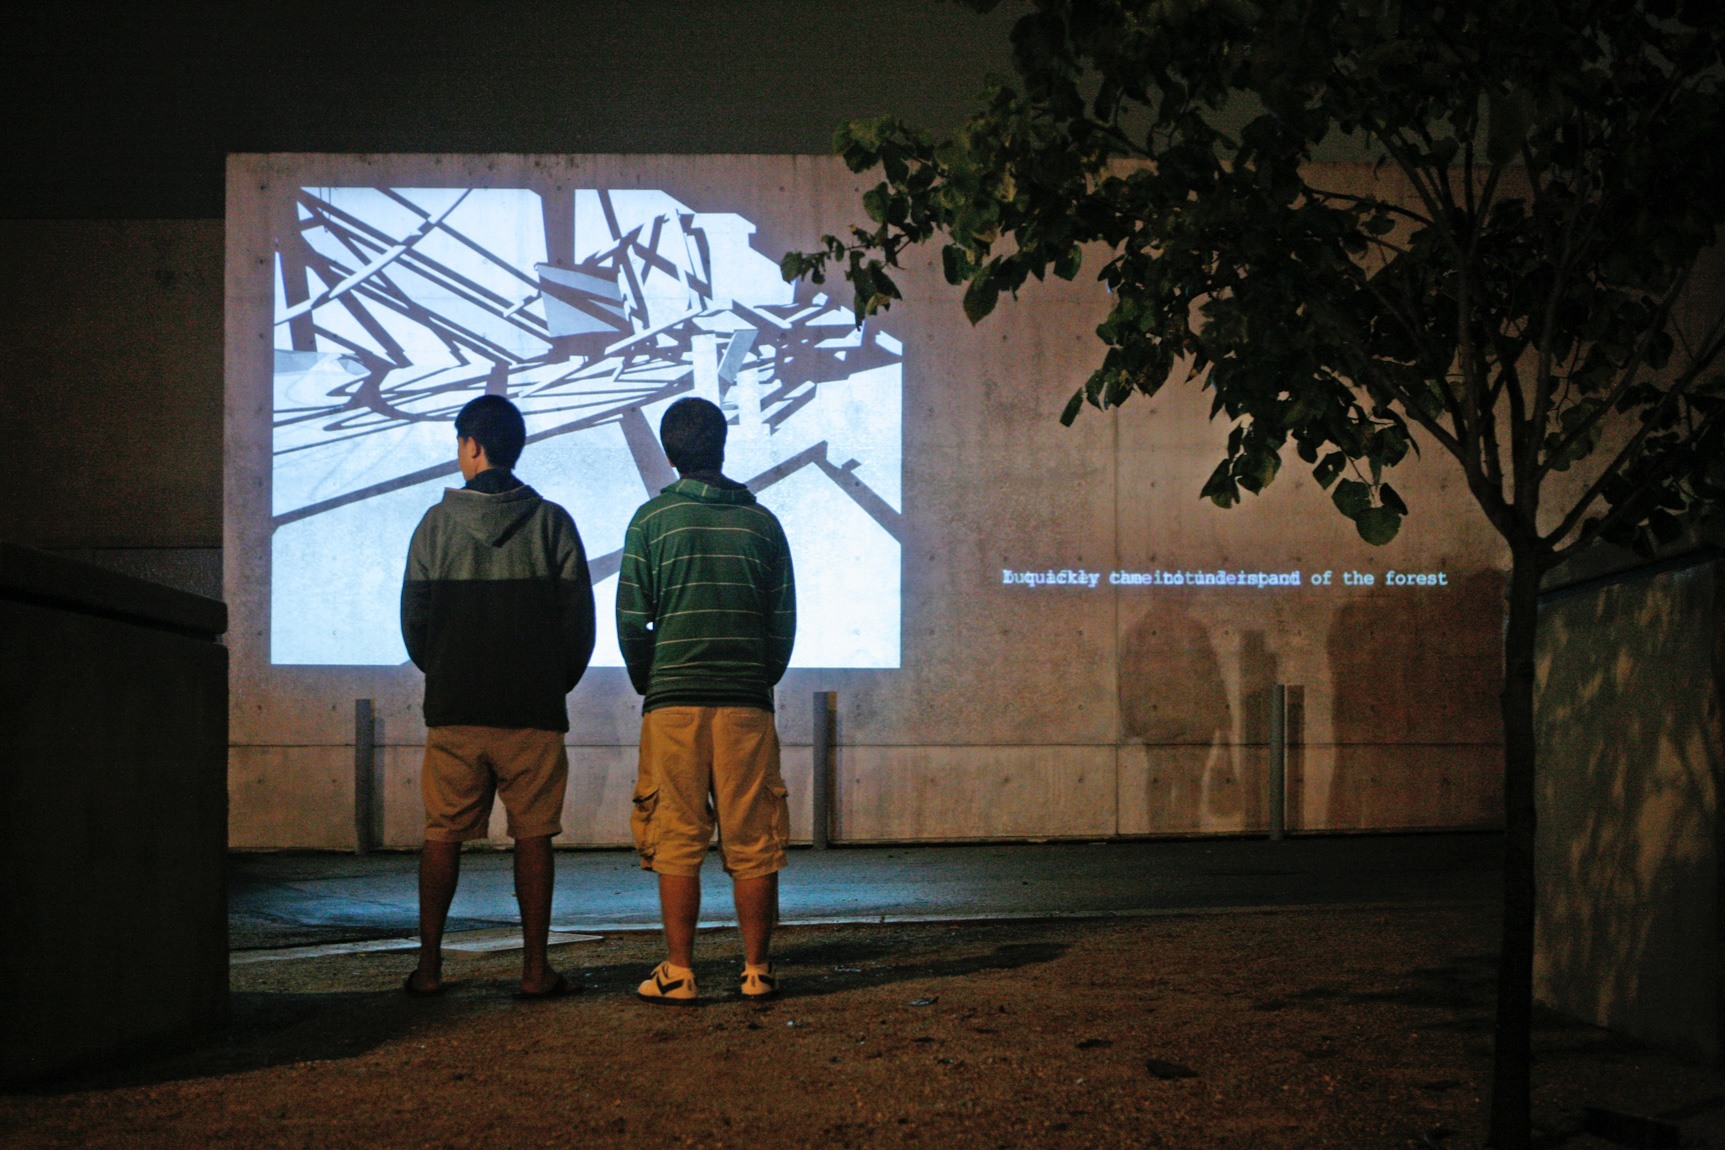 Two visitors stand outside before Ann Lislegaard's film "Crystal World" projected on a concrete wall at night.